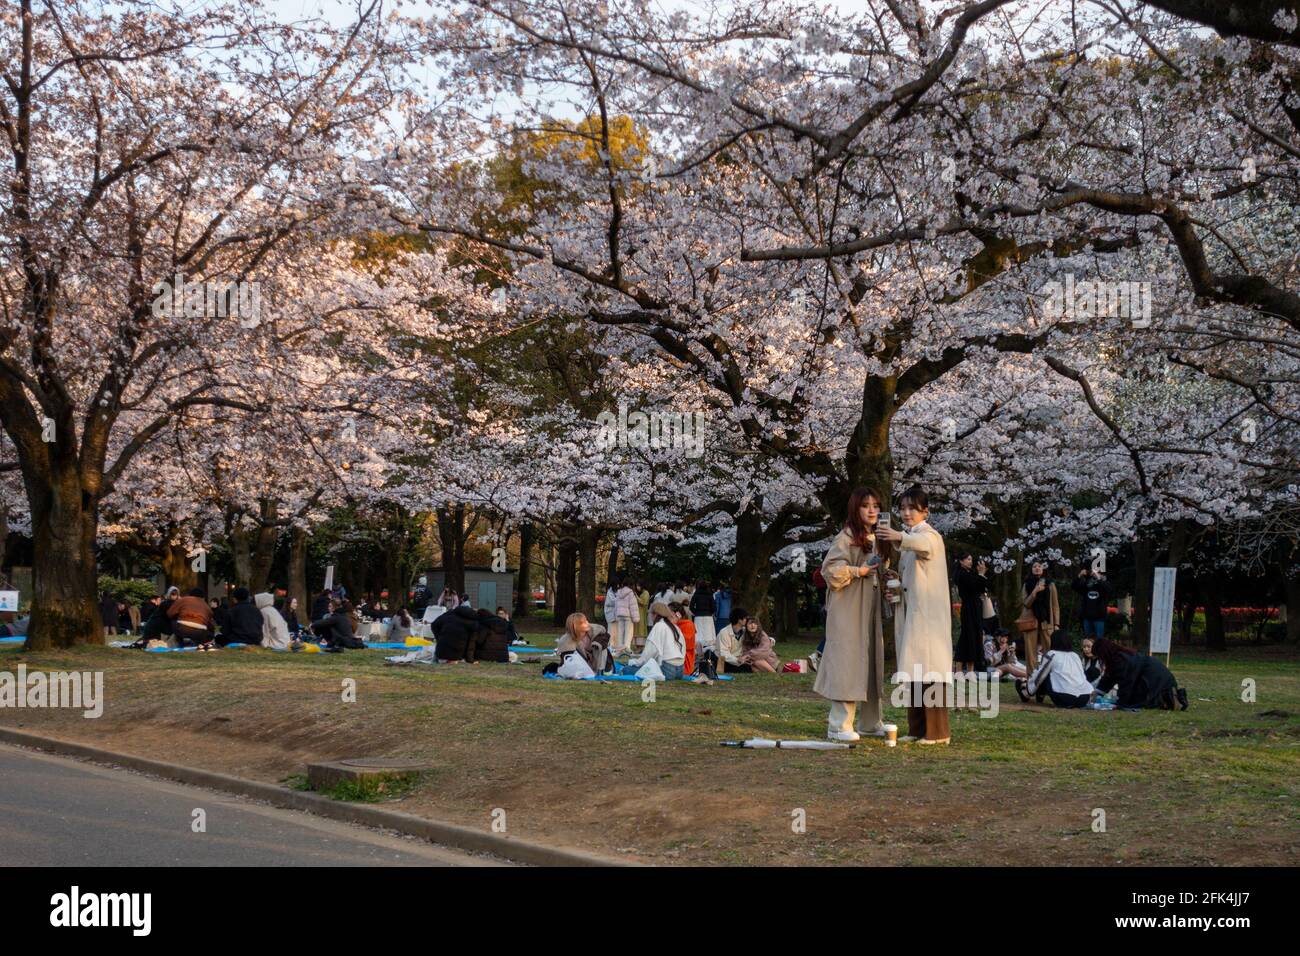 Tokyo, Japan, March 23, 2020: Asian people relax in the park under the blossoming sakura trees in Hanami season. Cherry blossoms. During covid 19 pand Stock Photo